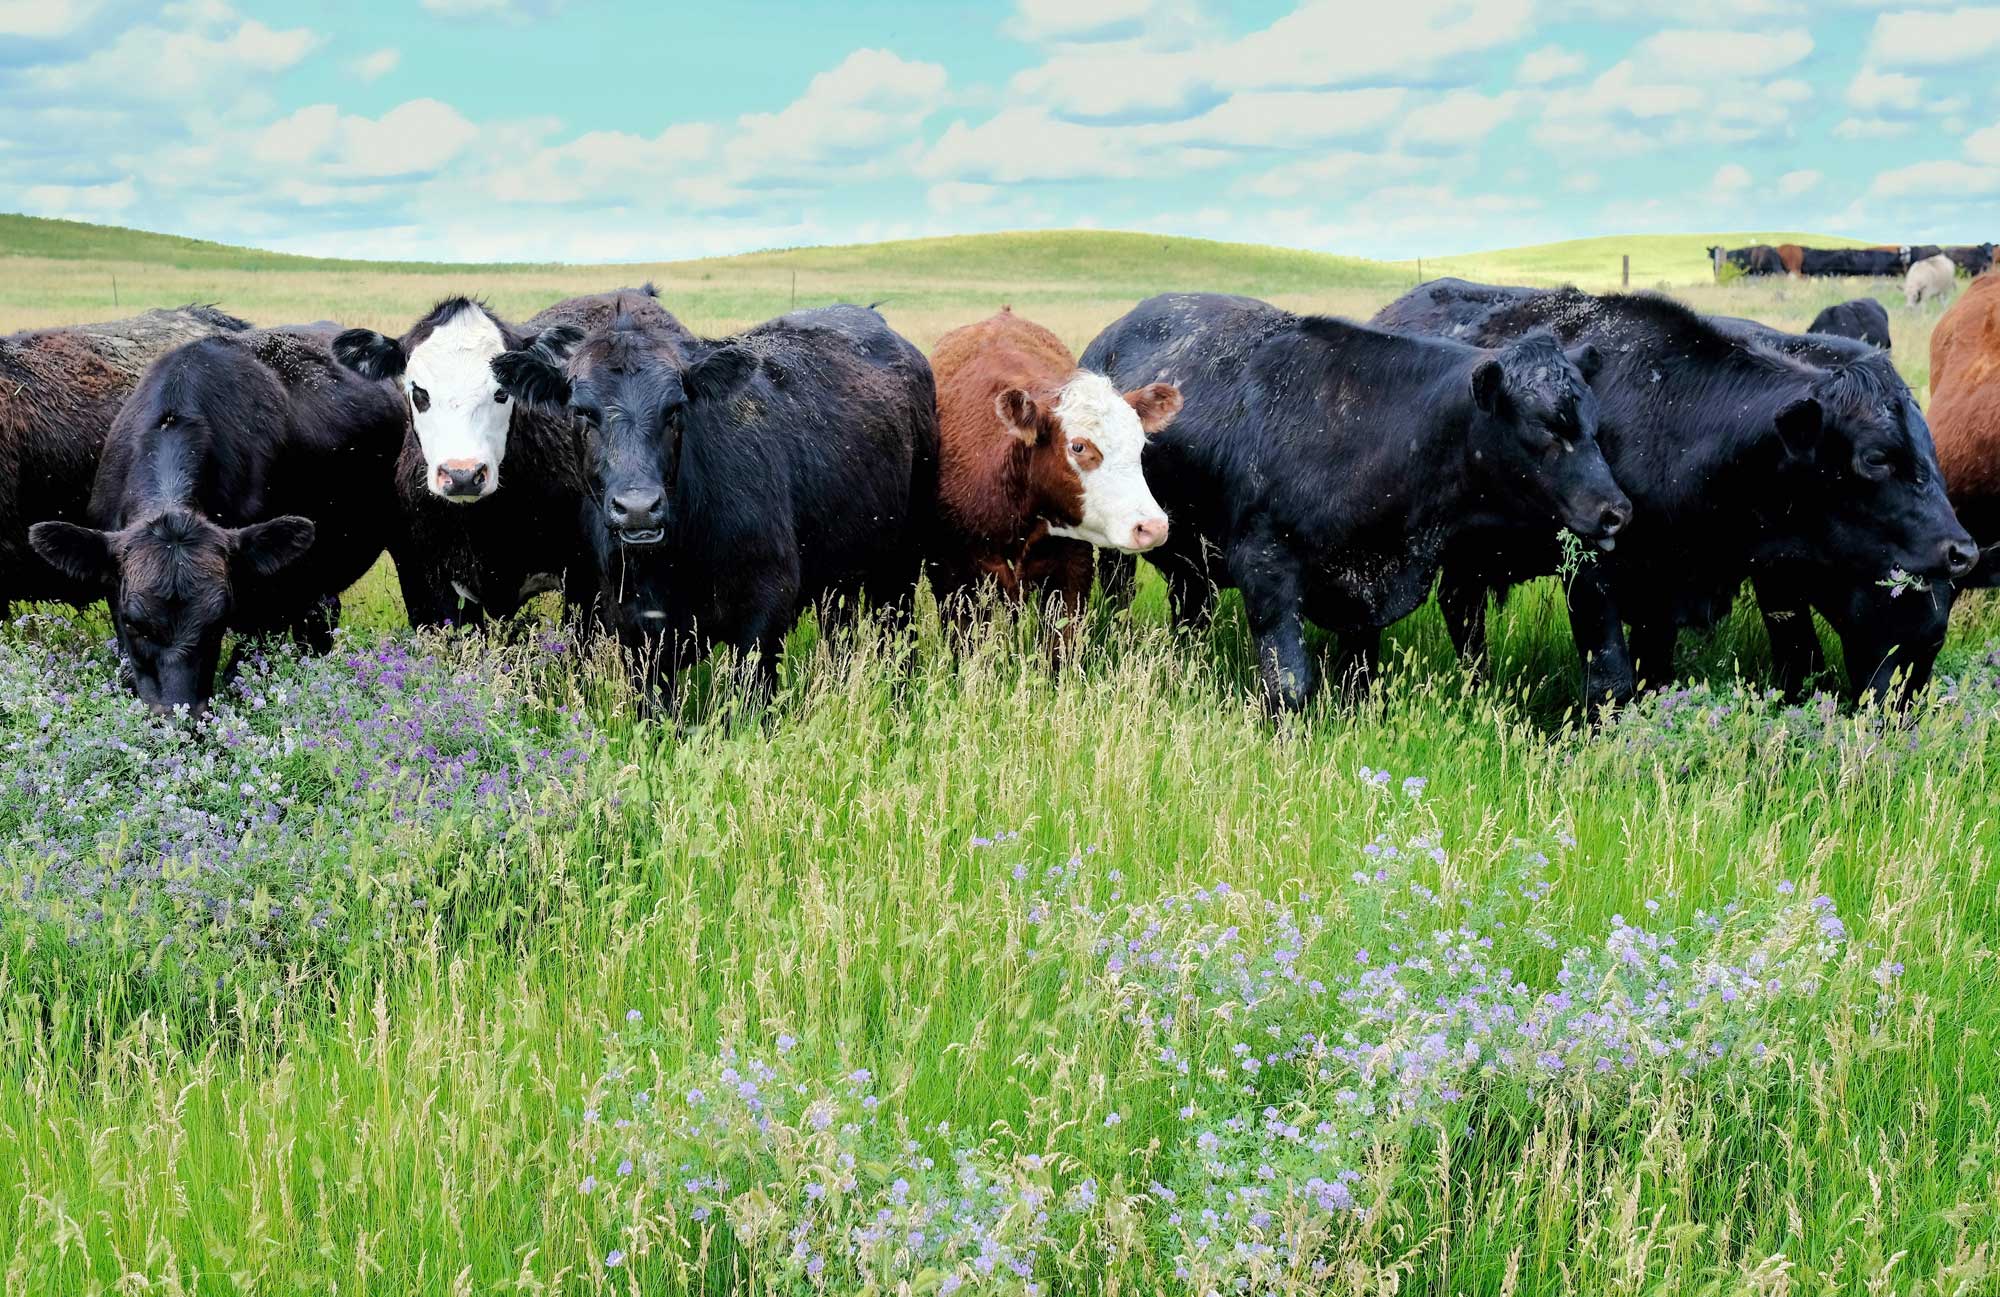 Photograph of a group of cattle standing among tall grasses and forbs in South Dakota, U.S.A.